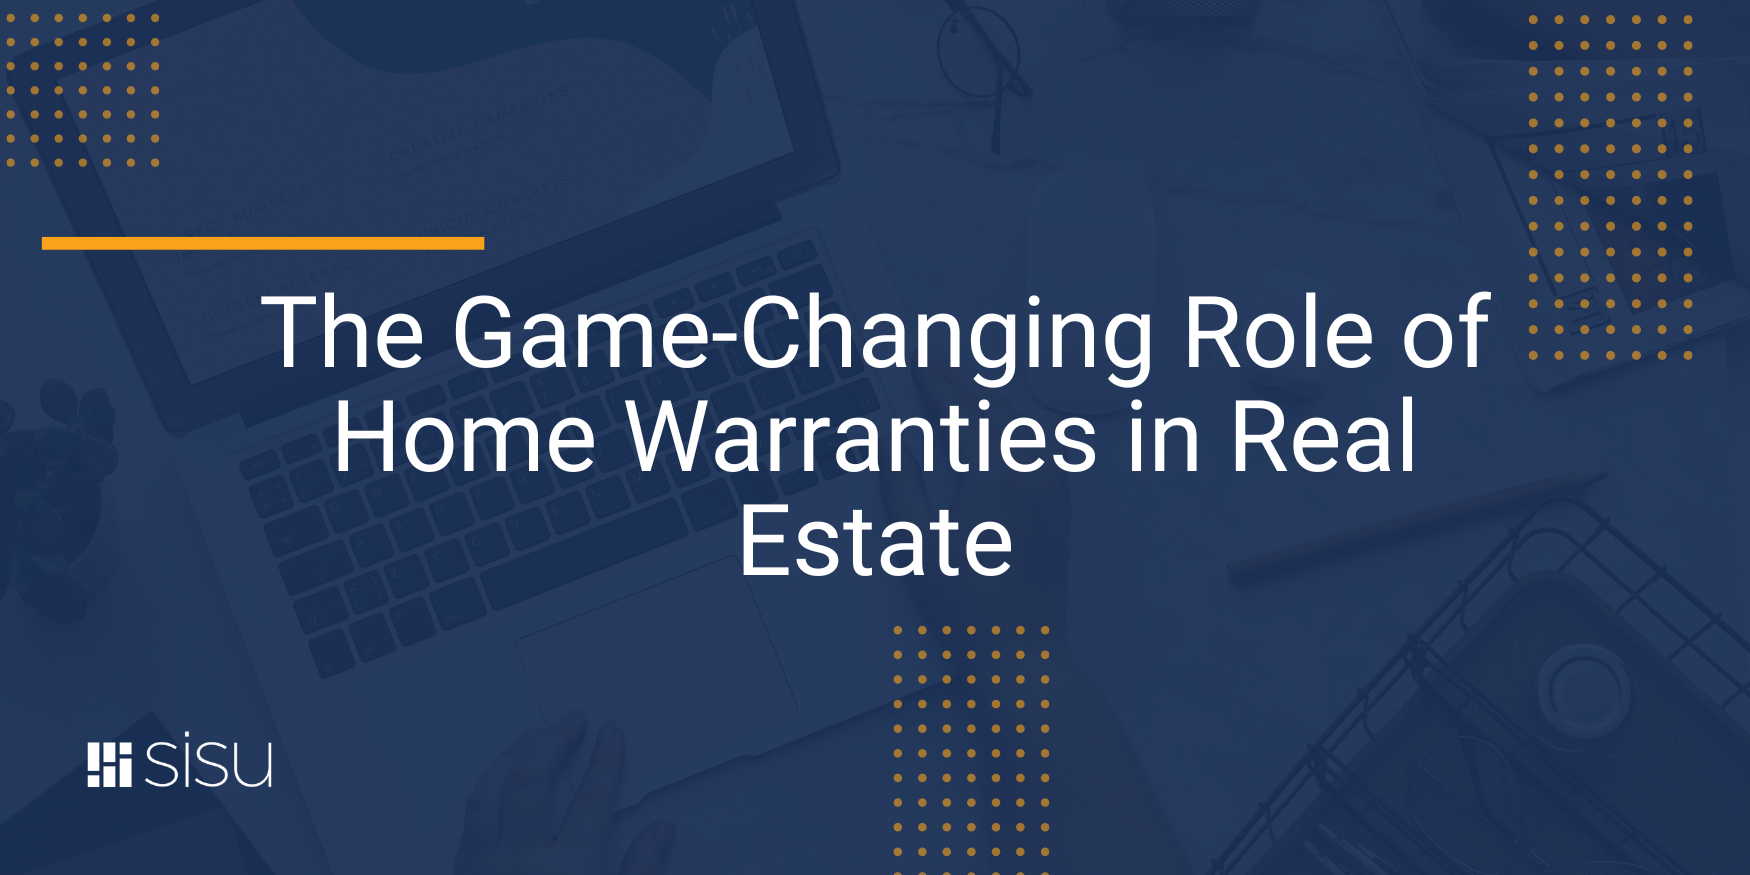 The Game-Changing Role of Home Warranties in Real Estate